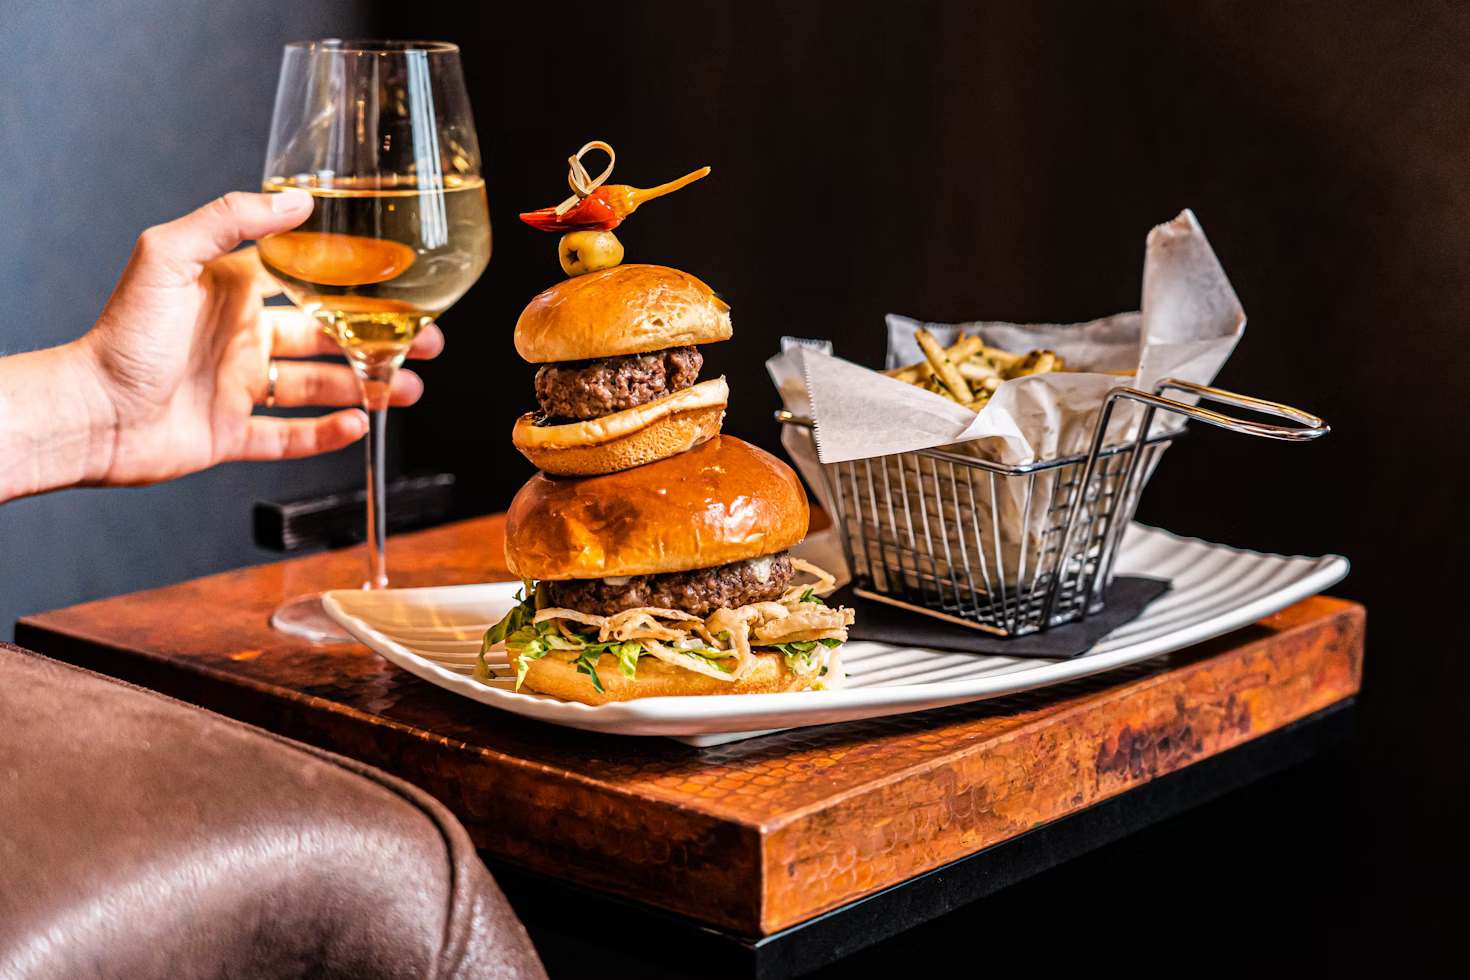 Two-tier burgers, fries and a glass of wine on a table with a person’s hand